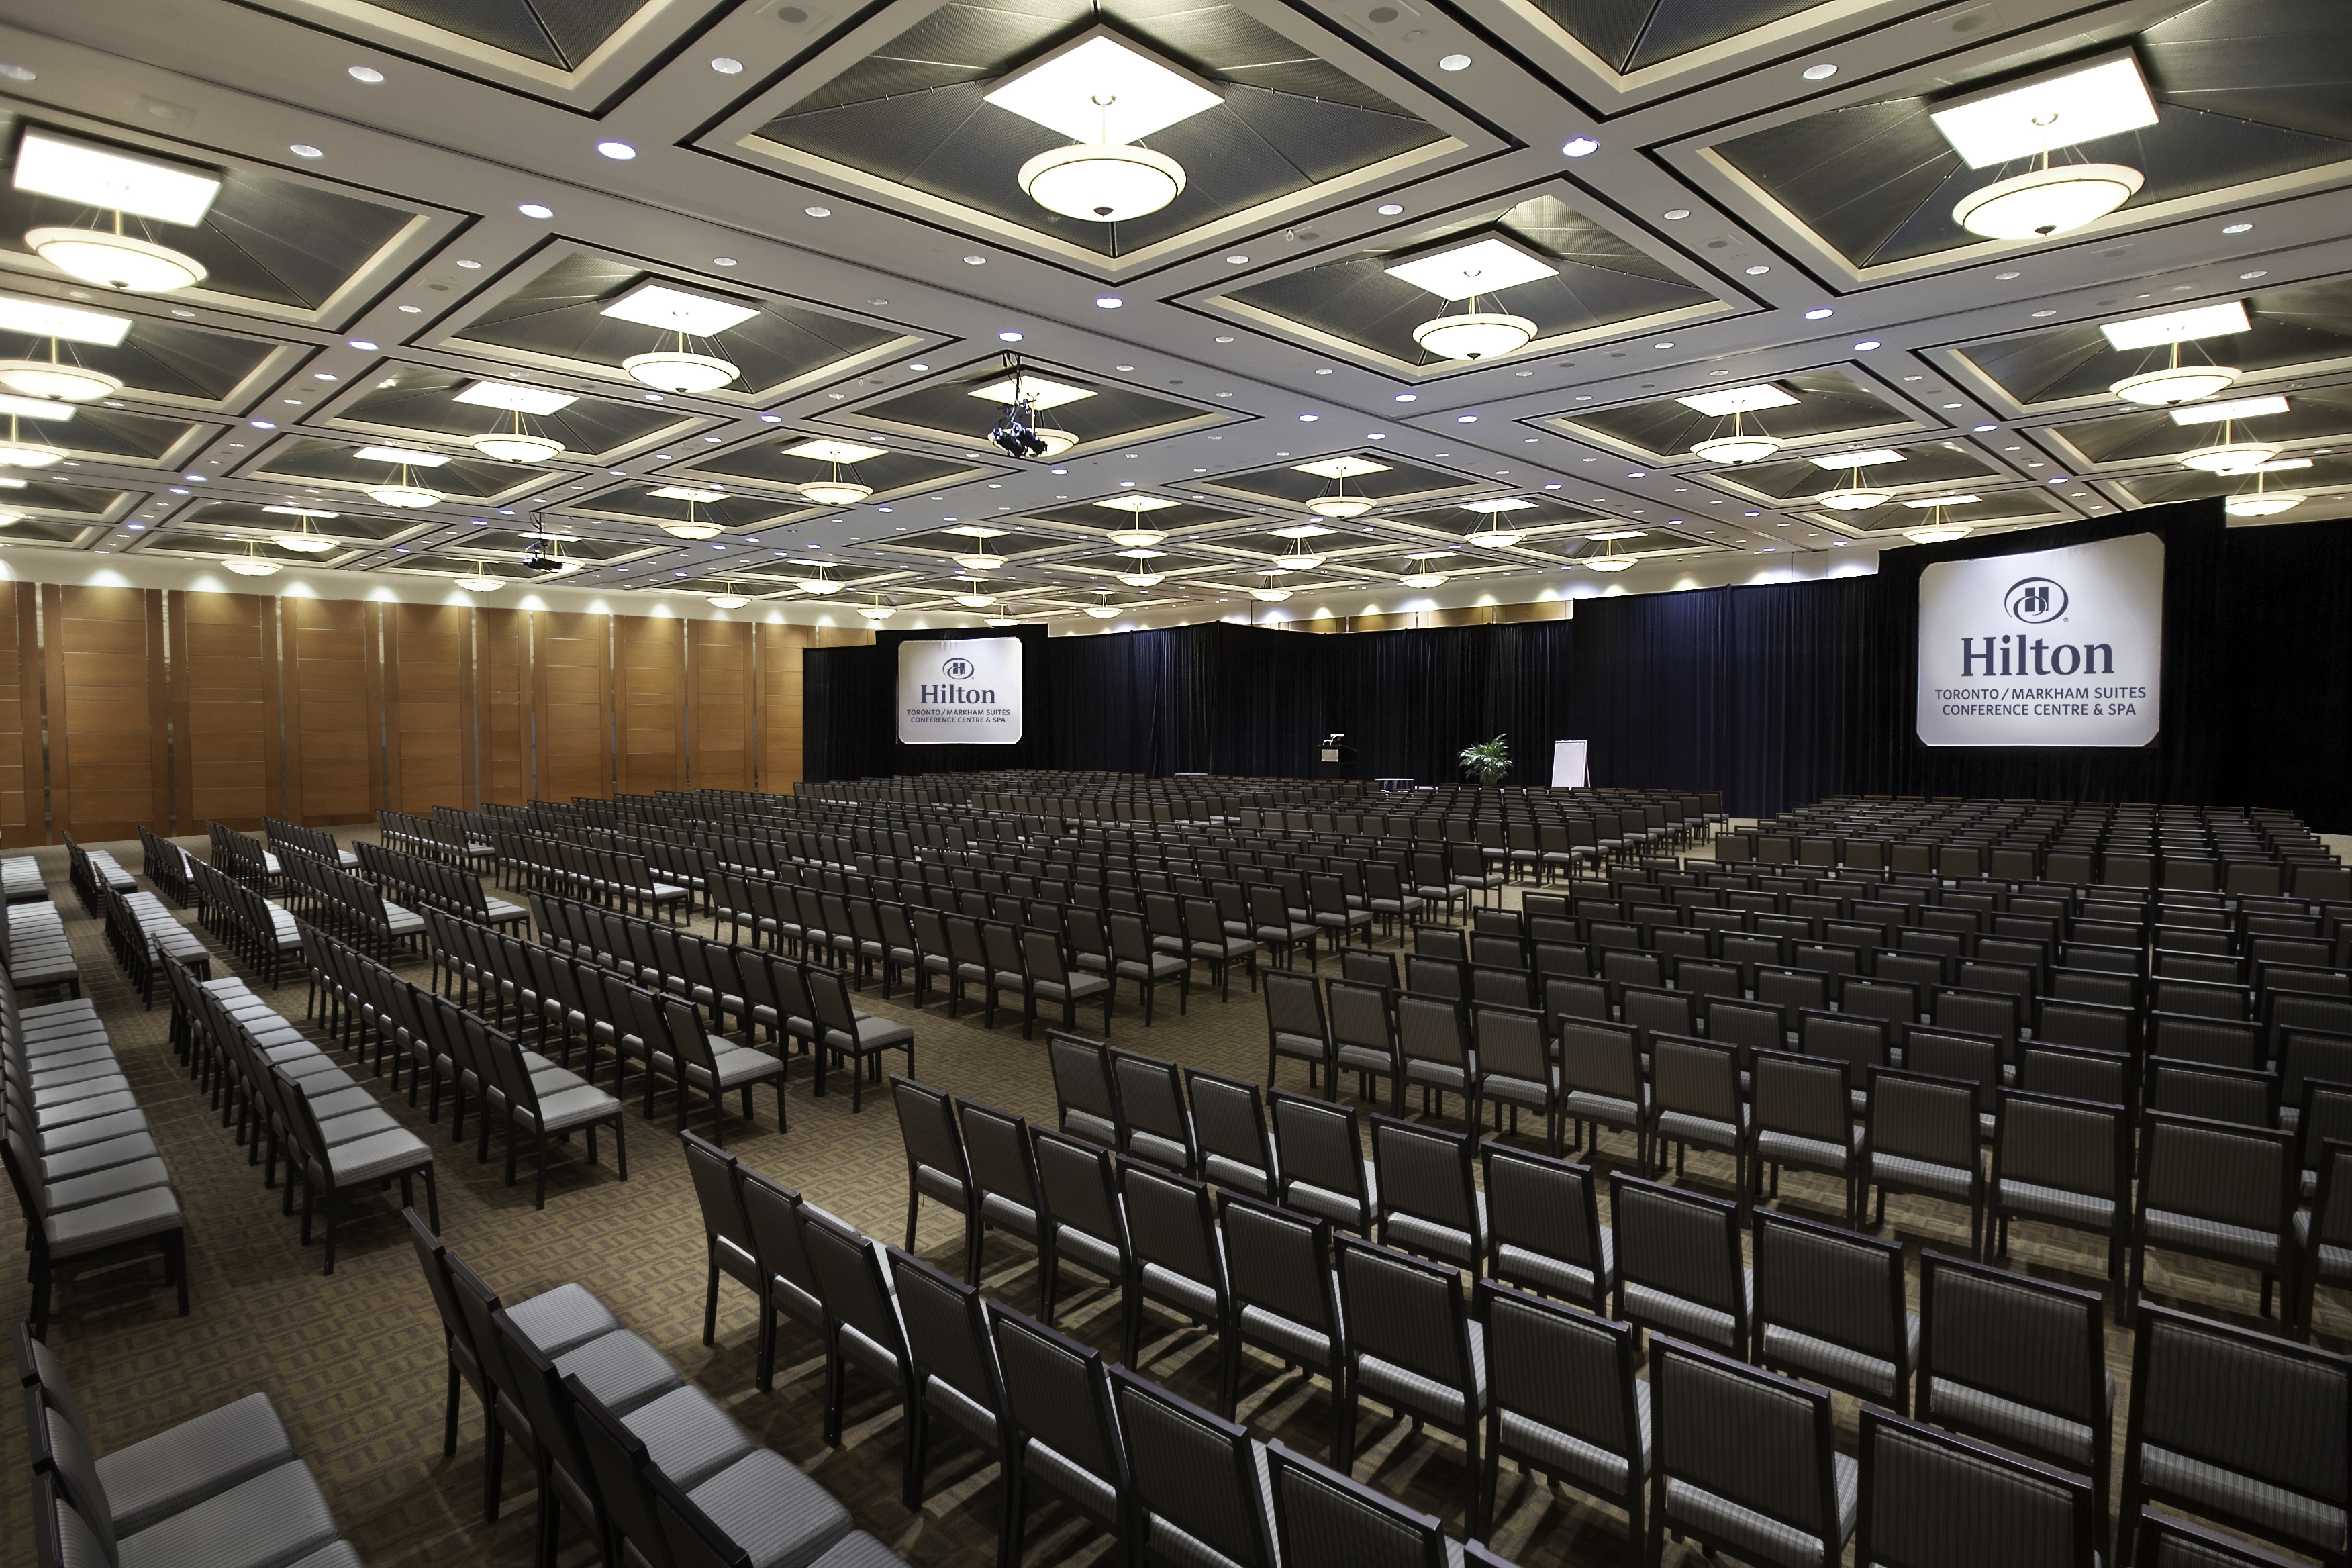 Conference Centre in Theatre Set Up